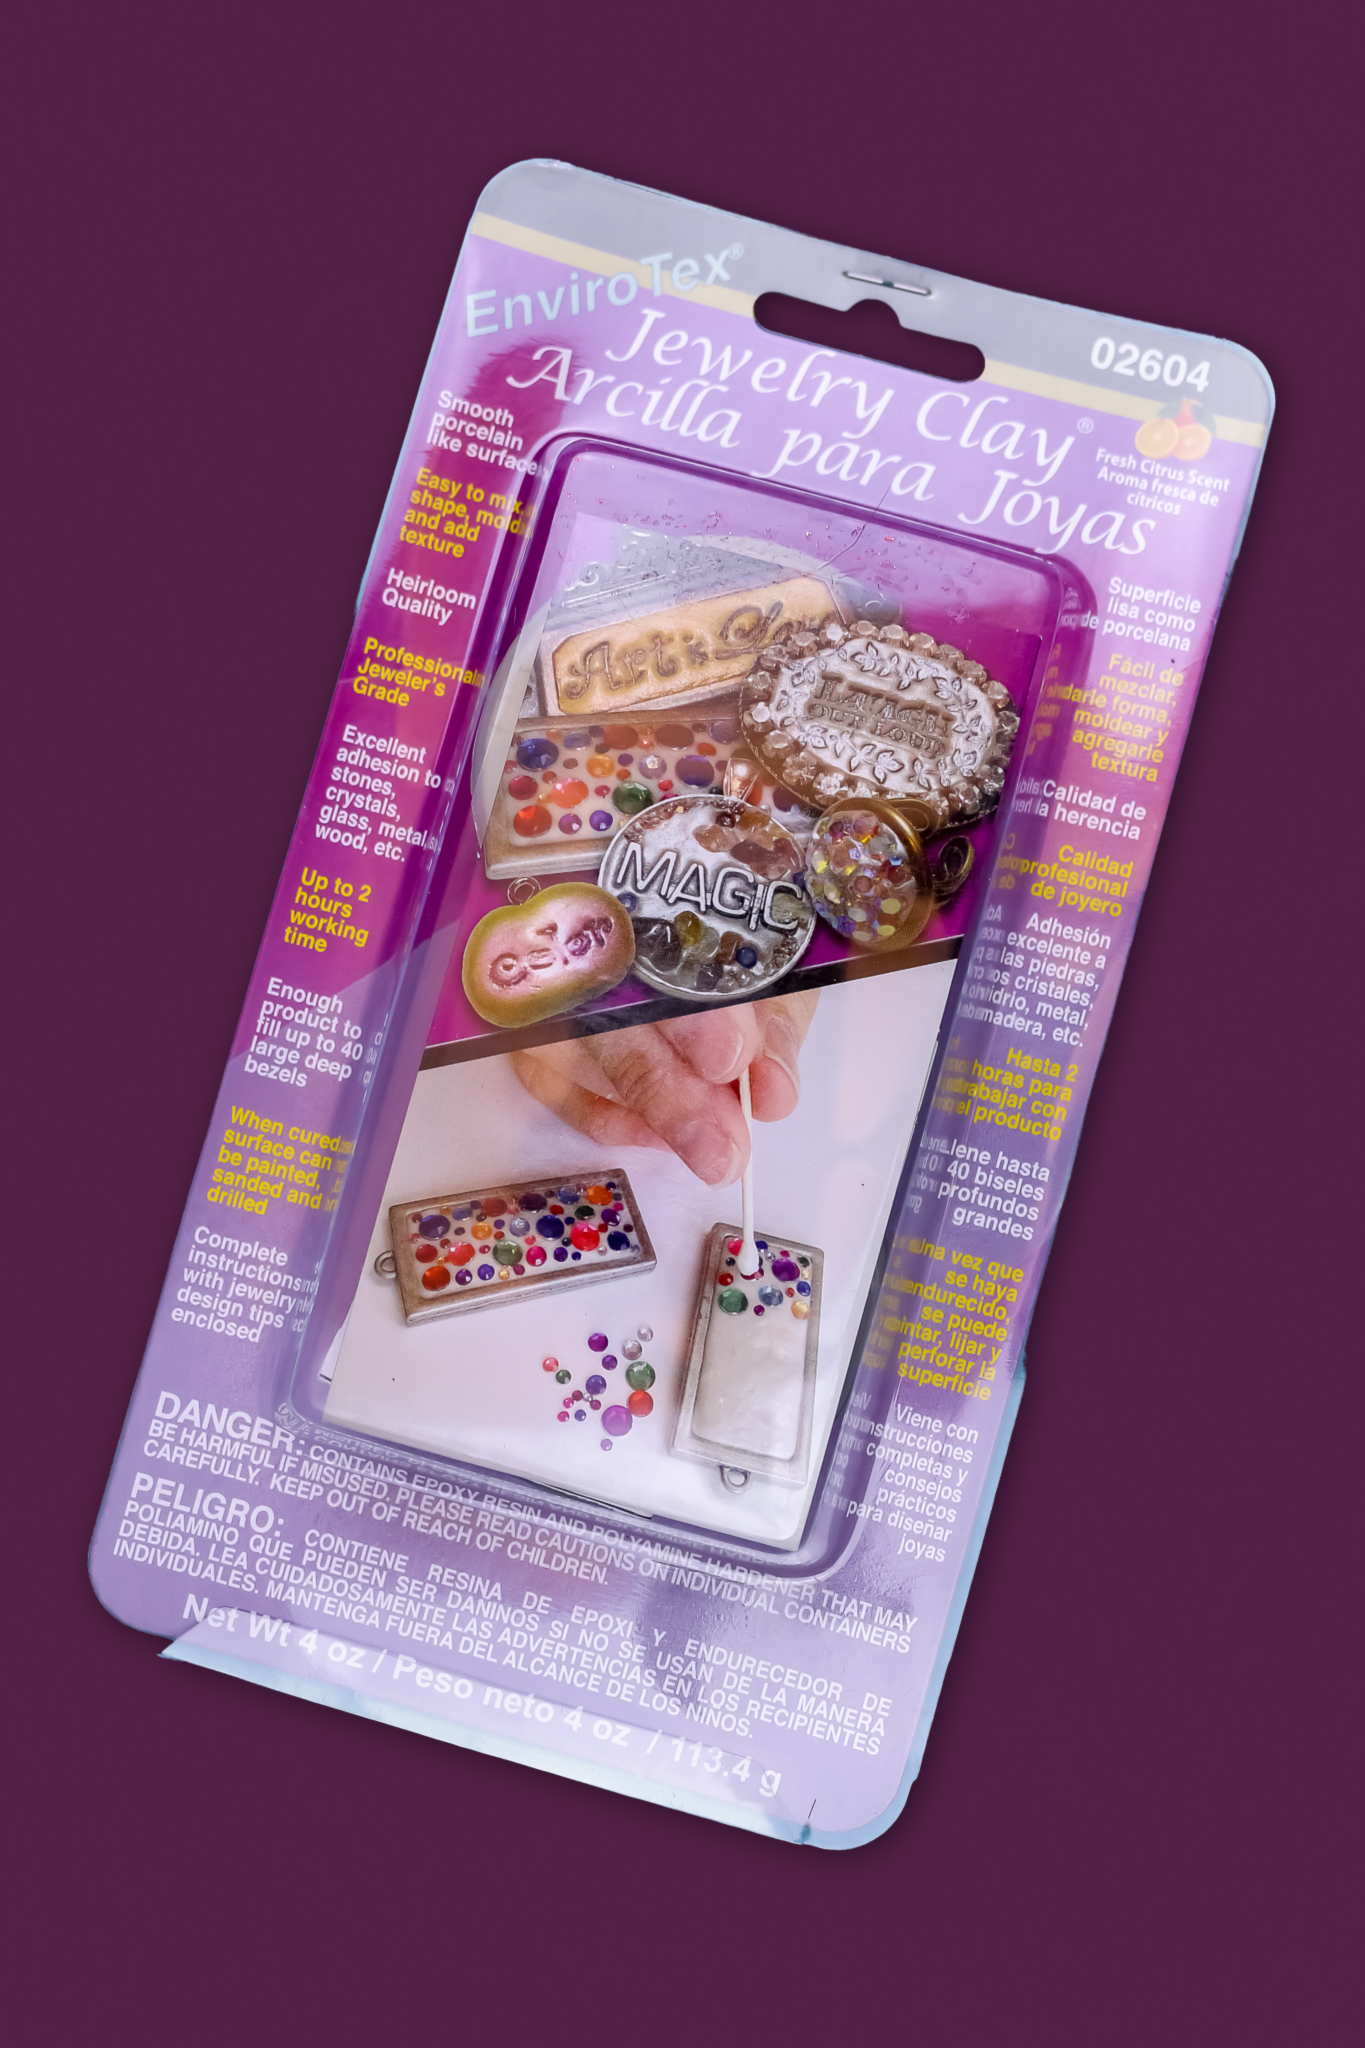 a package of ETI jewelry clay